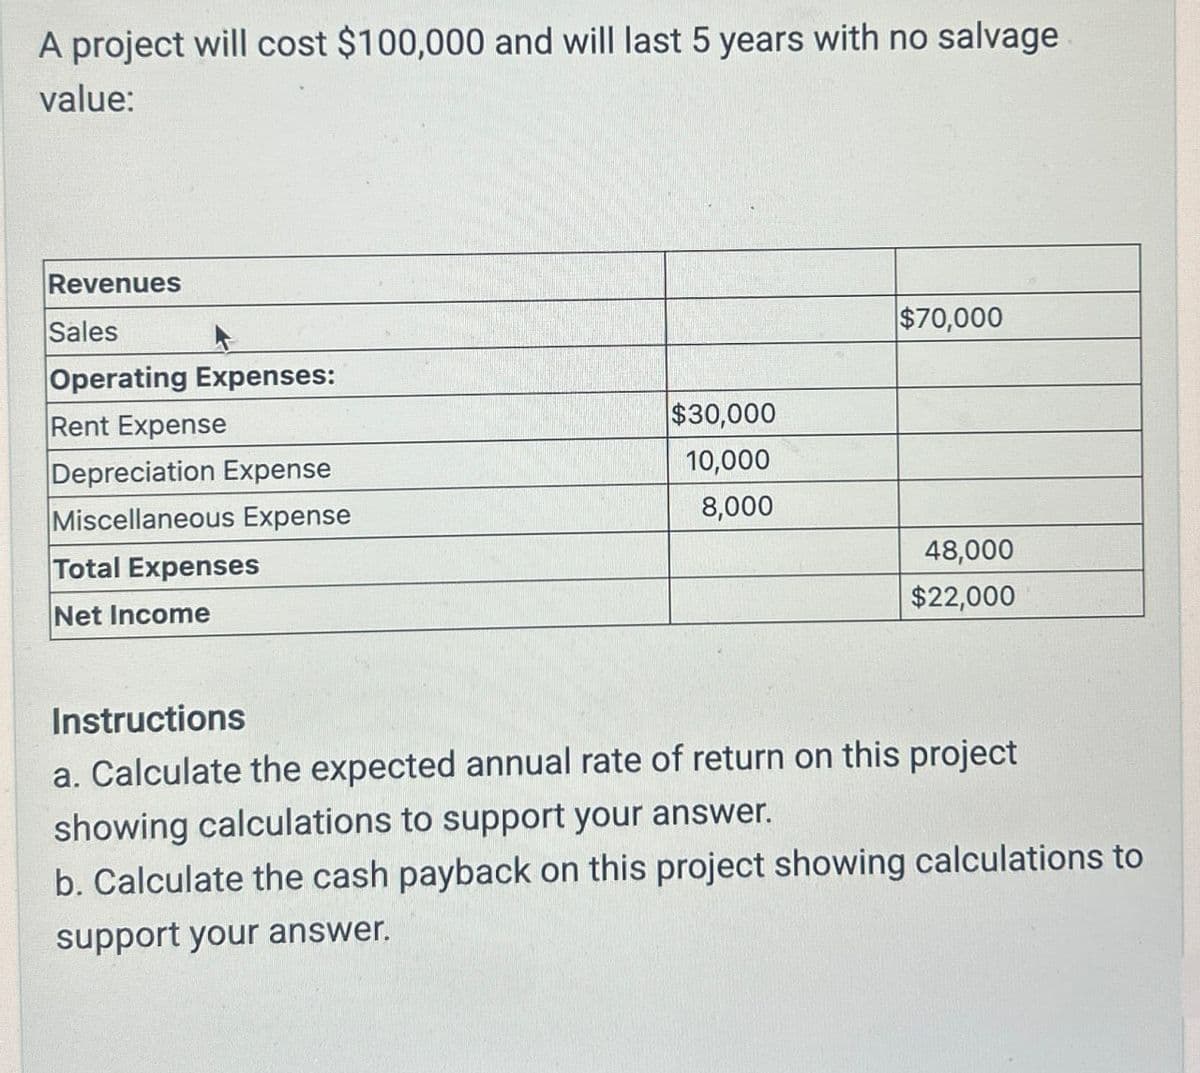 A project will cost $100,000 and will last 5 years with no salvage
value:
Revenues
Sales
$70,000
Operating Expenses:
Rent Expense
$30,000
Depreciation Expense
10,000
Miscellaneous Expense
8,000
Total Expenses
48,000
Net Income
$22,000
Instructions
a. Calculate the expected annual rate of return on this project
showing calculations to support your answer.
b. Calculate the cash payback on this project showing calculations to
support your answer.